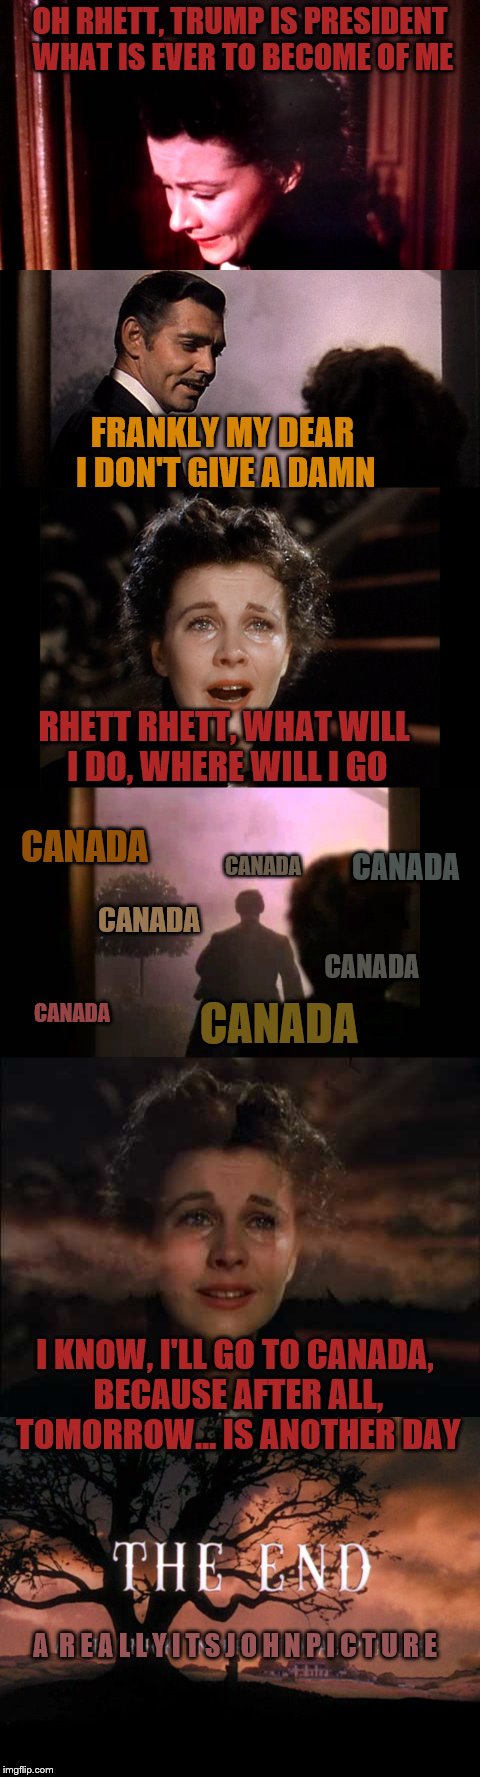 Time may prove me wrong, but I think too many out there are being overly melodramatic.  | OH RHETT, TRUMP IS PRESIDENT WHAT IS EVER TO BECOME OF ME; FRANKLY MY DEAR I DON'T GIVE A DAMN; RHETT RHETT, WHAT WILL I DO, WHERE WILL I GO; CANADA; CANADA; CANADA; CANADA; CANADA; CANADA; CANADA; I KNOW, I'LL GO TO CANADA, BECAUSE AFTER ALL, TOMORROW... IS ANOTHER DAY; A  R E A L L Y I T S J O H N P I C T U R E | image tagged in memes,election 2016,gone with the wind,gwtw | made w/ Imgflip meme maker